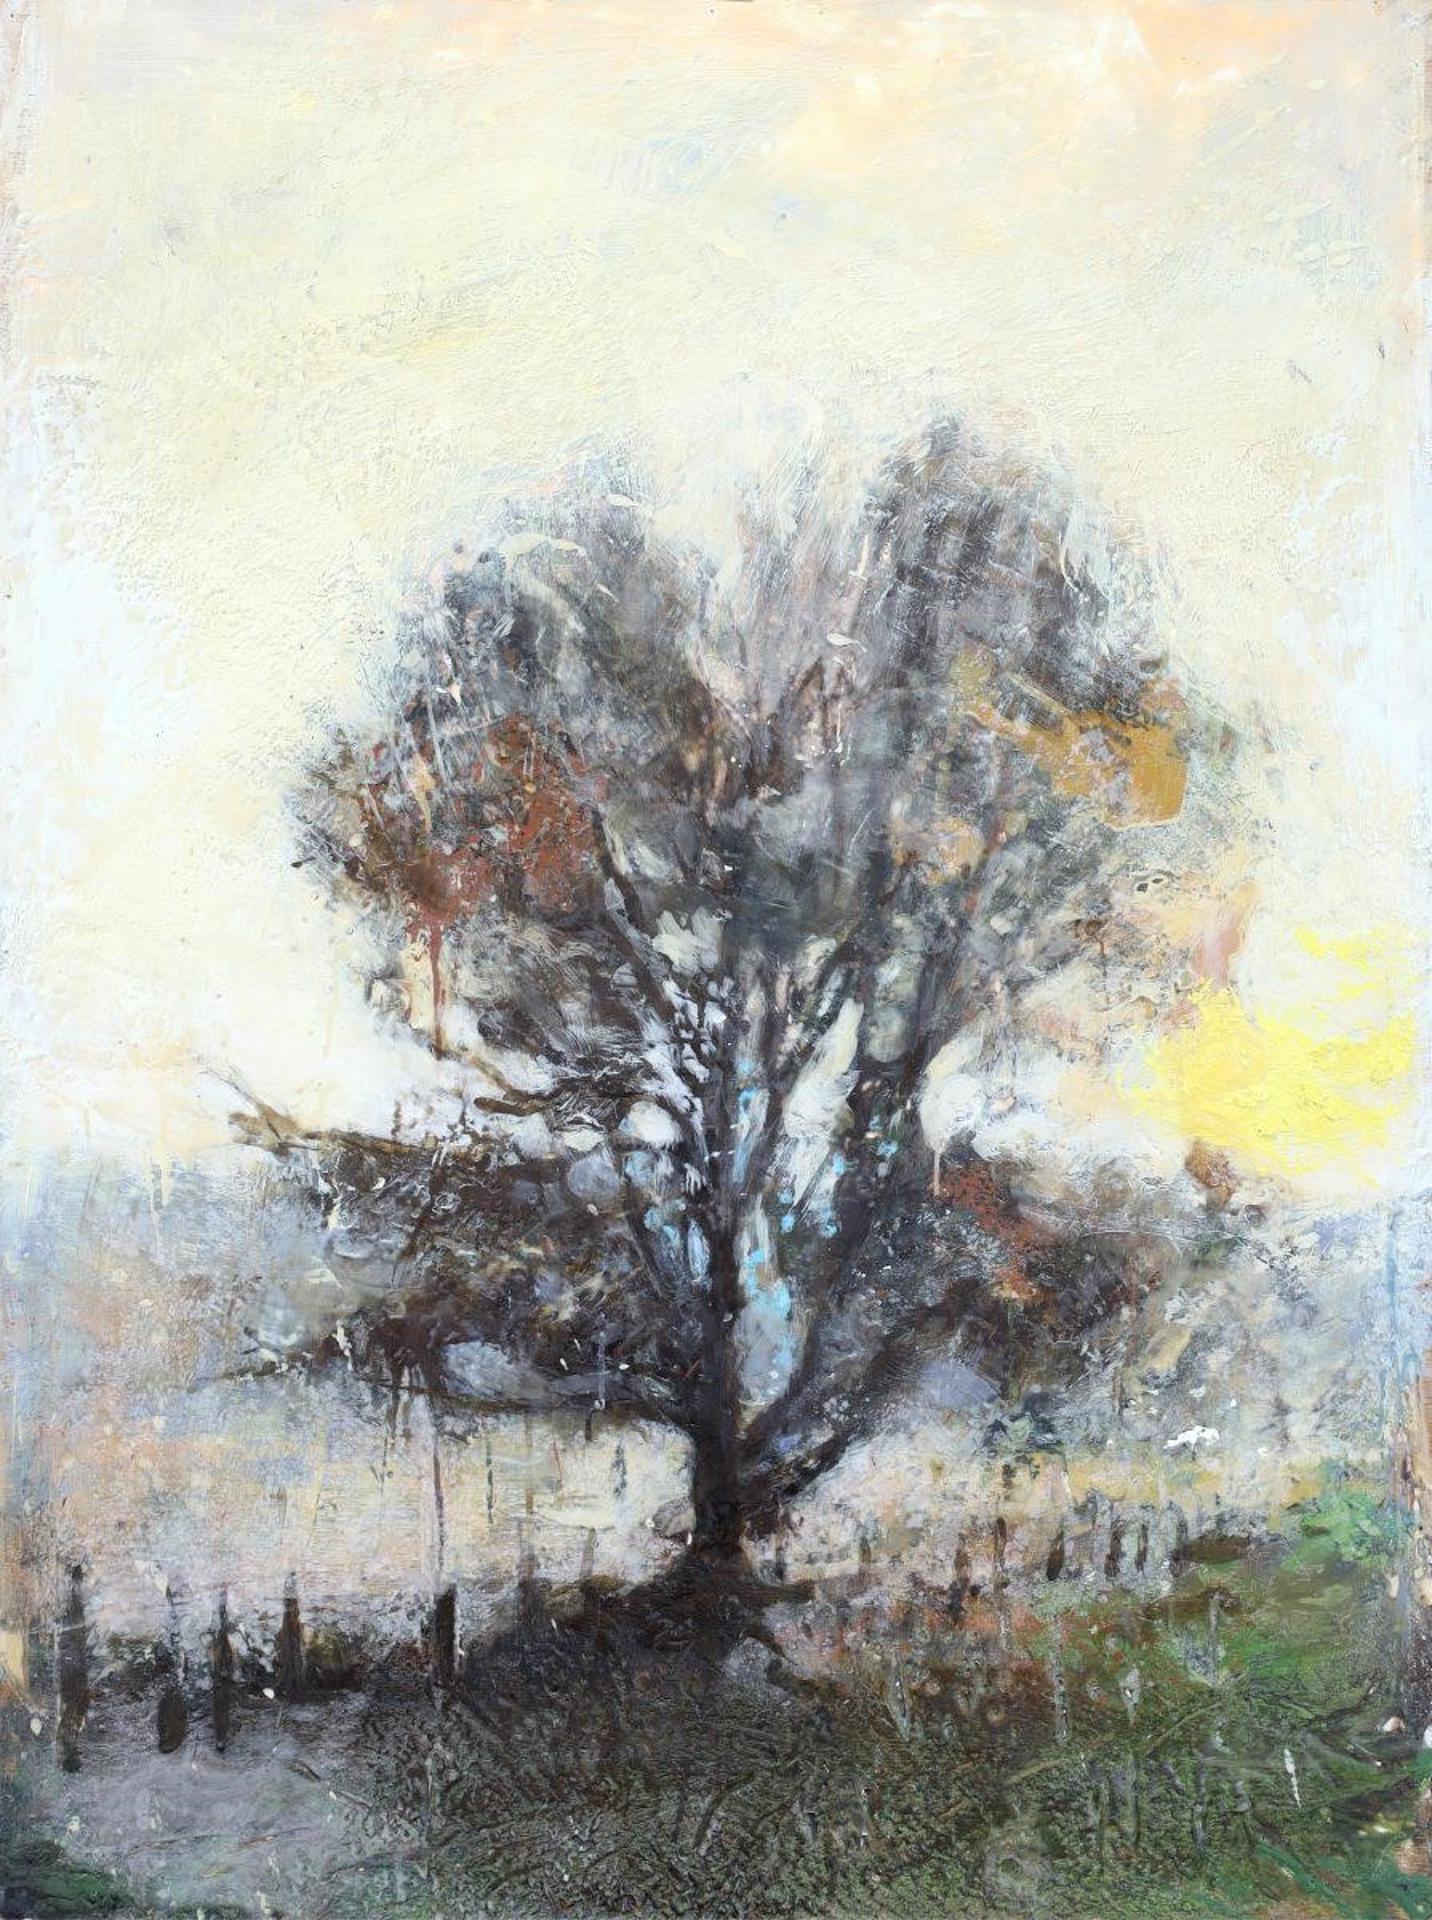 Mark Holliday (1956) - Study For Large Tree Painting; 2012